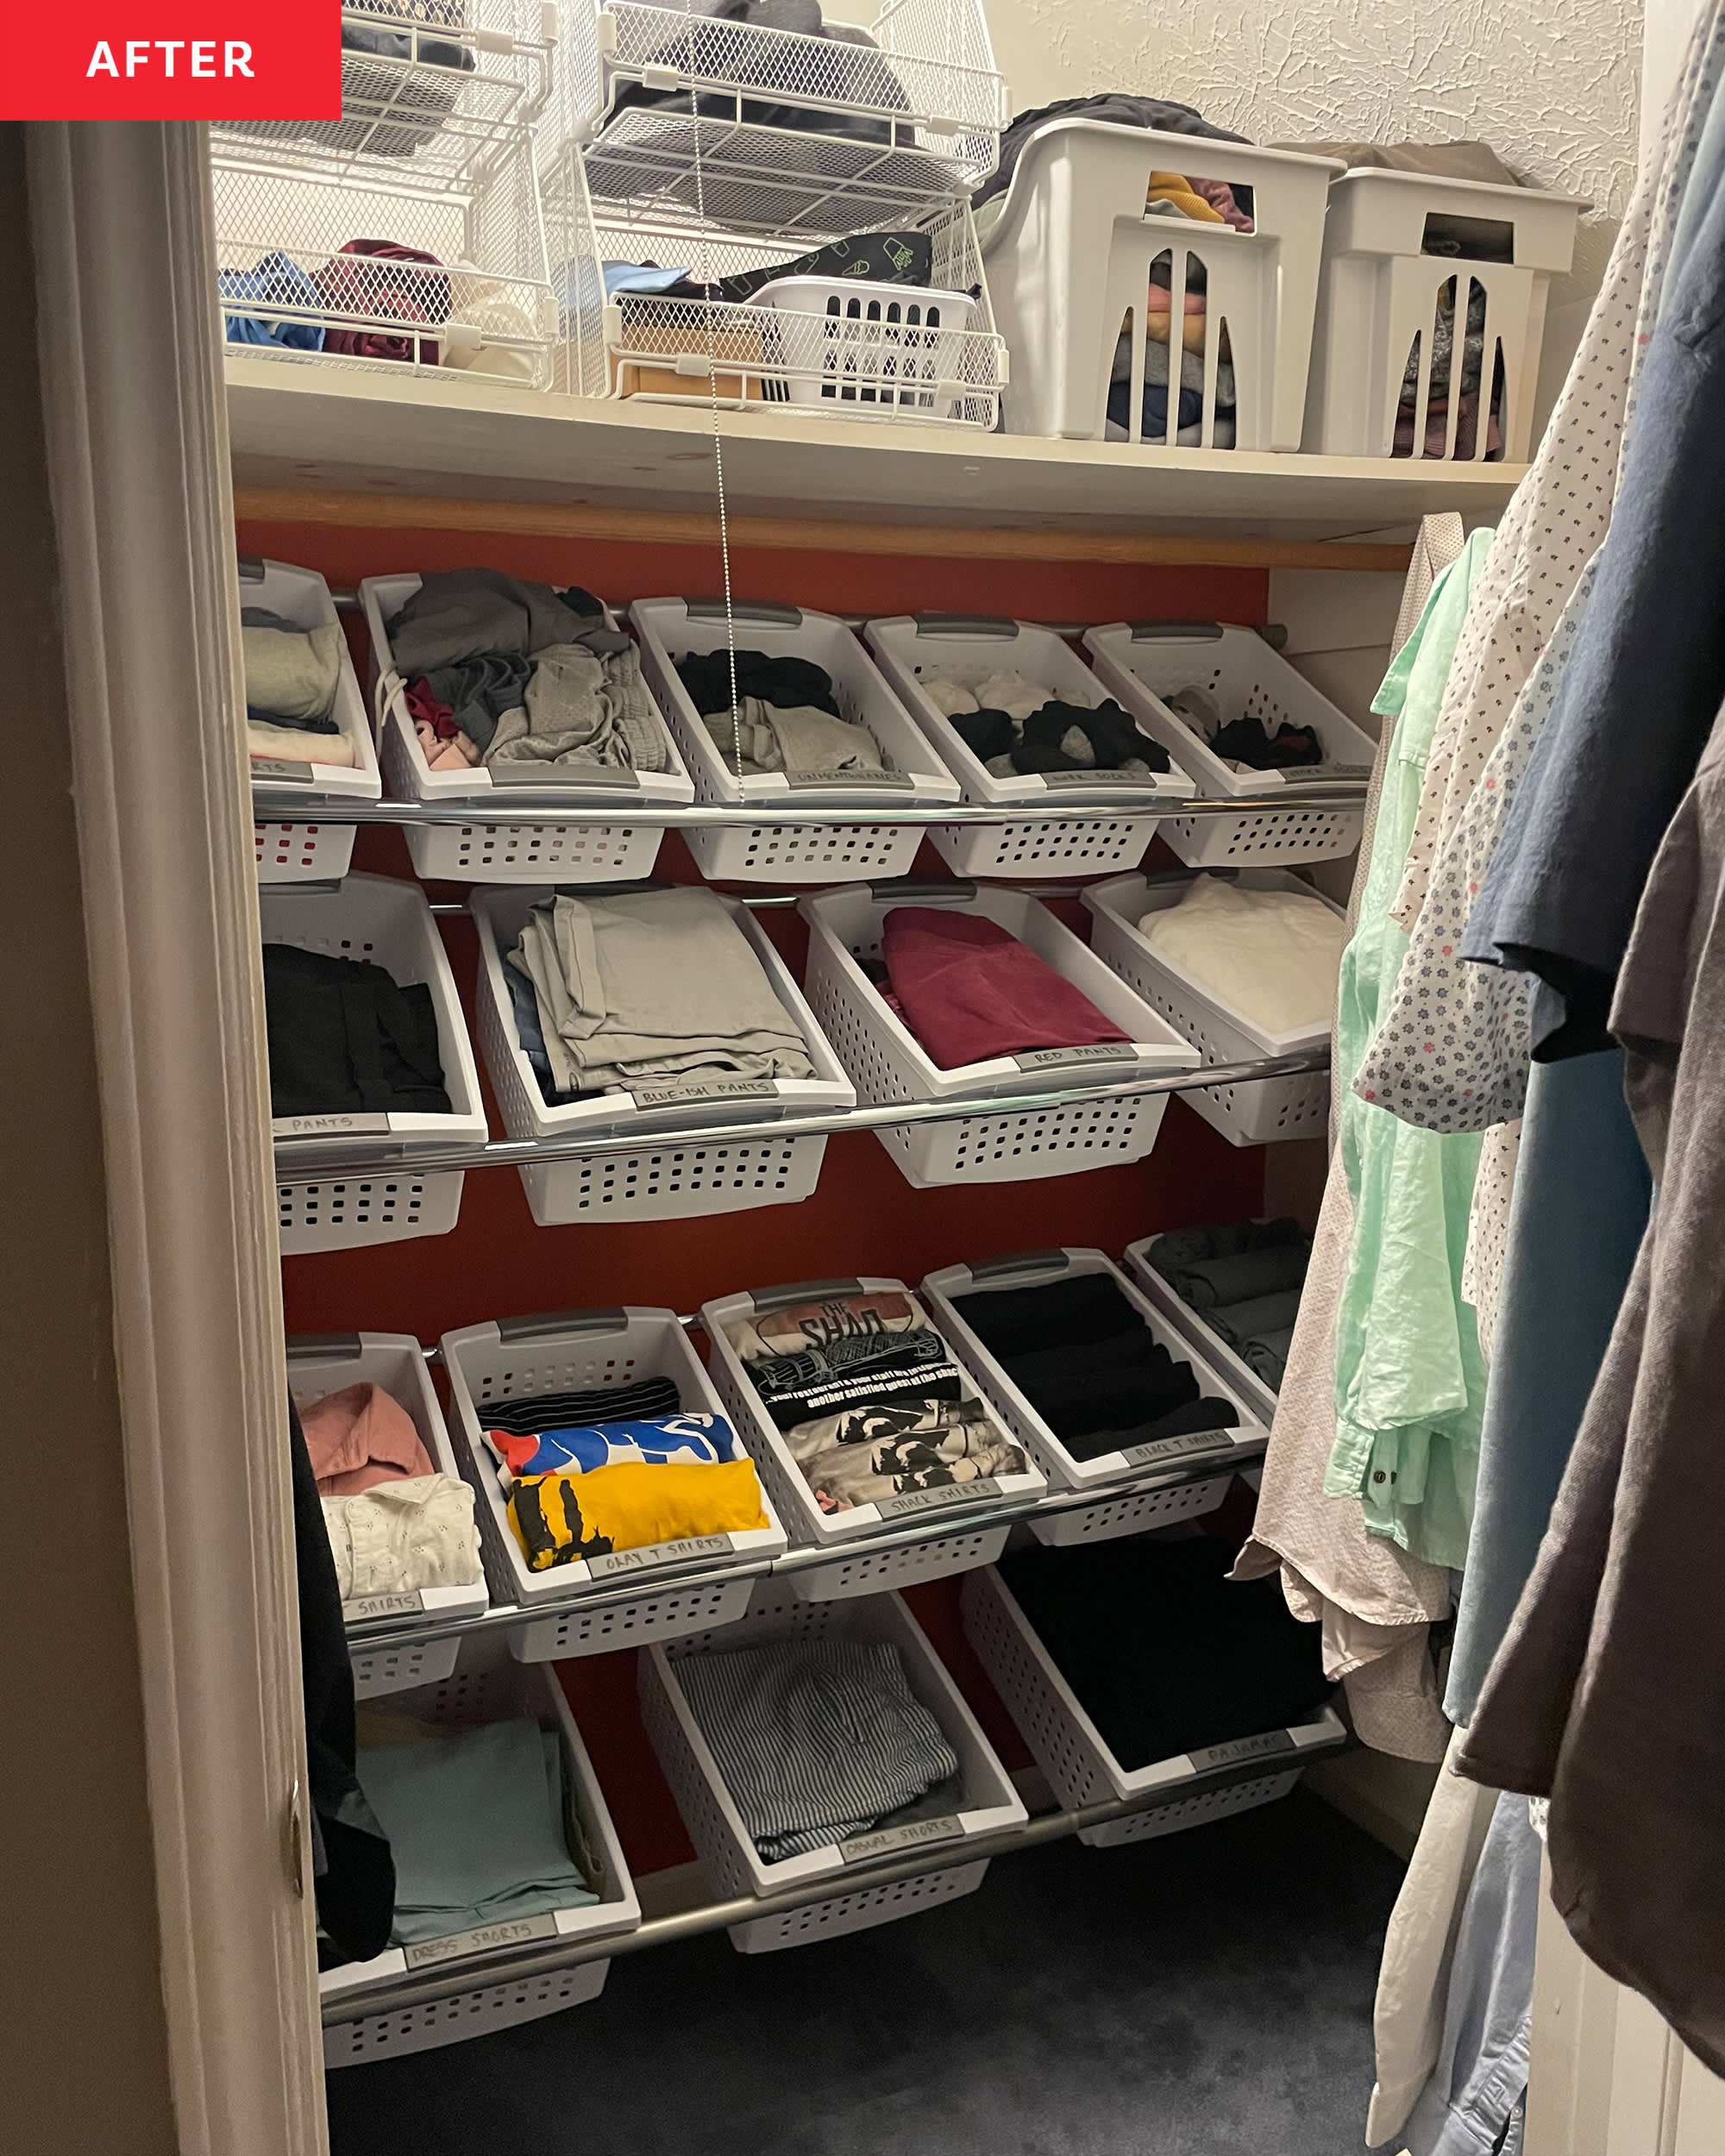 This Closet Makeover Has a Creative Laundry Basket Organizing System